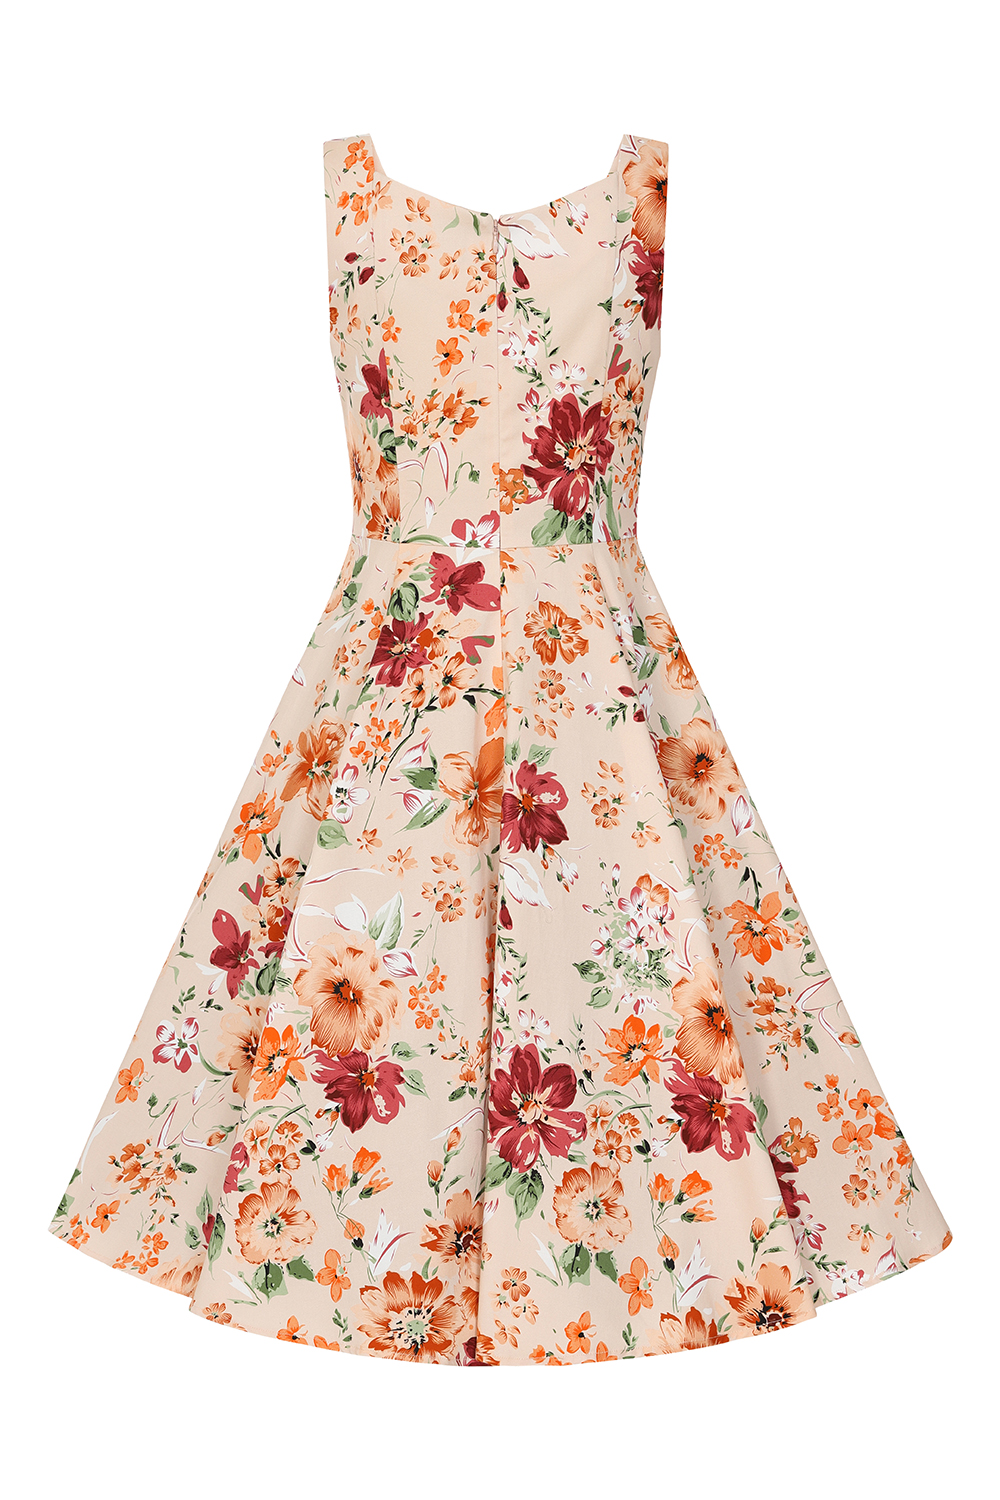 Heart&Roses Ariana floral swing dress